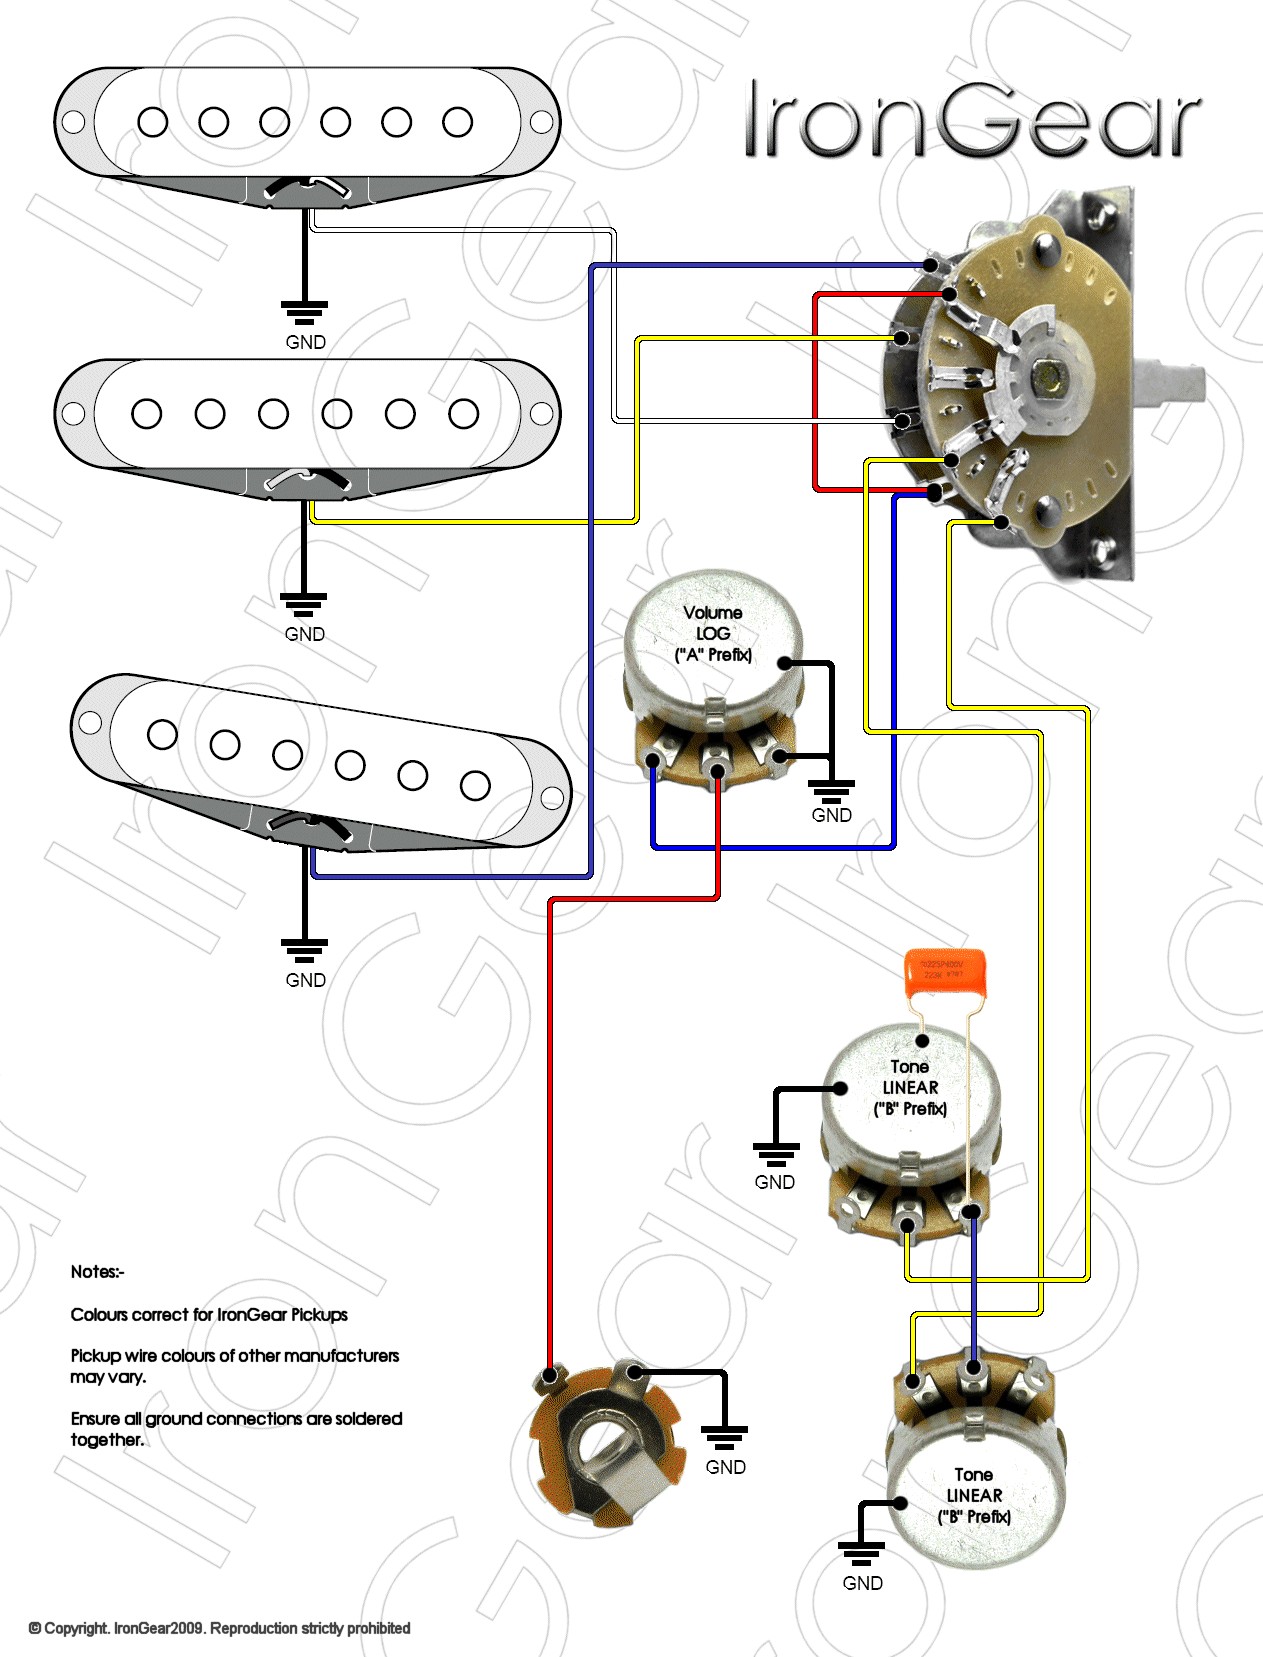 3 Wire Switch Diagram Best Old Three Way Switch Wiring Gallery Everything You Need to Of 3 Wire Switch Diagram